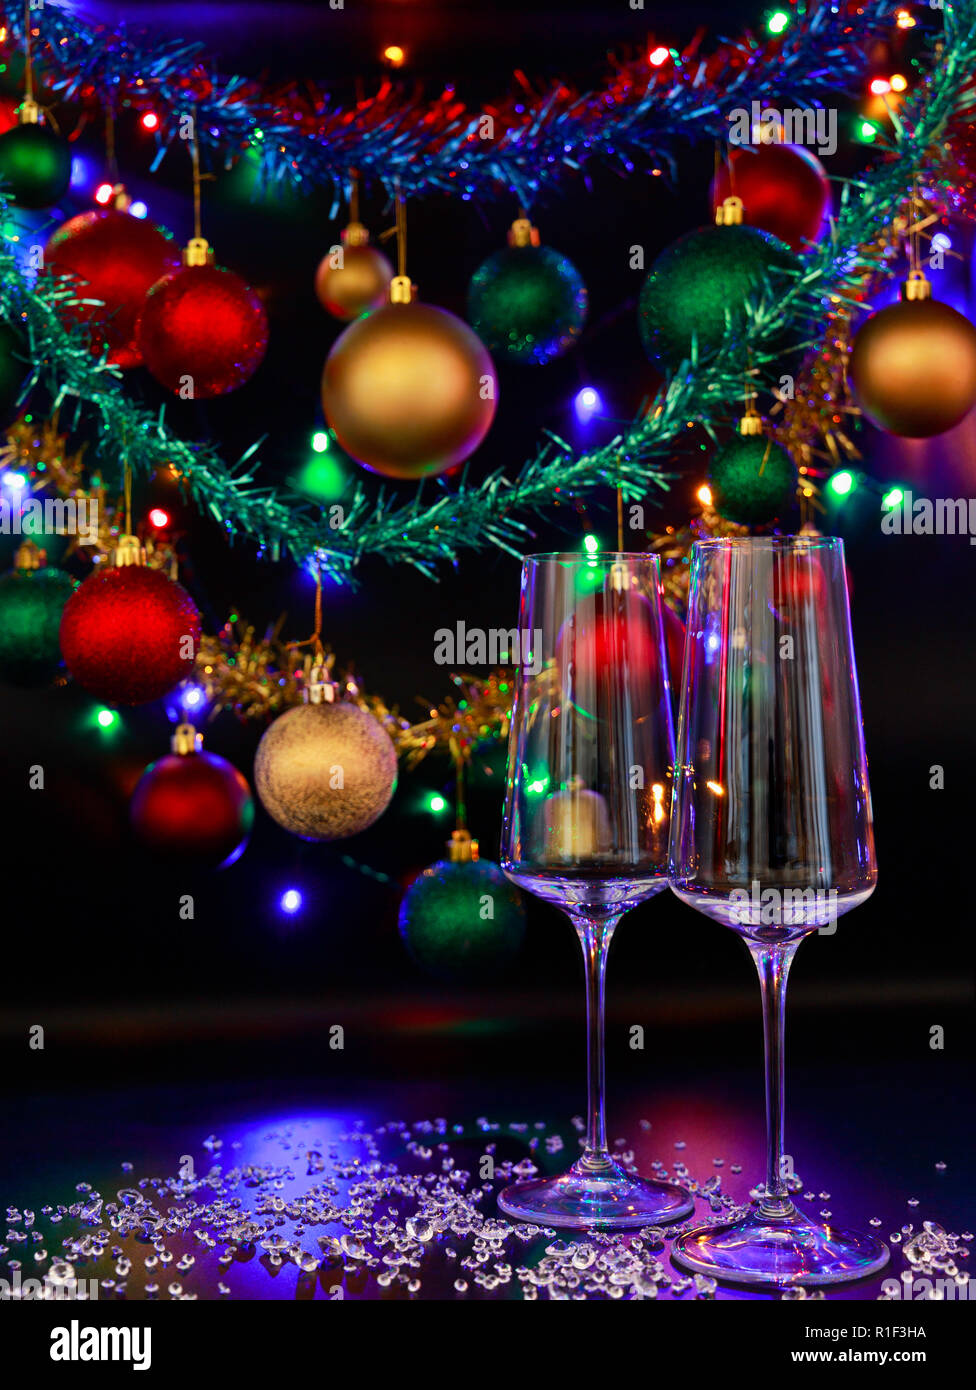 Two champagne glasses against a background of colorful Christmas decorations and Christmas lights. Stock Photo